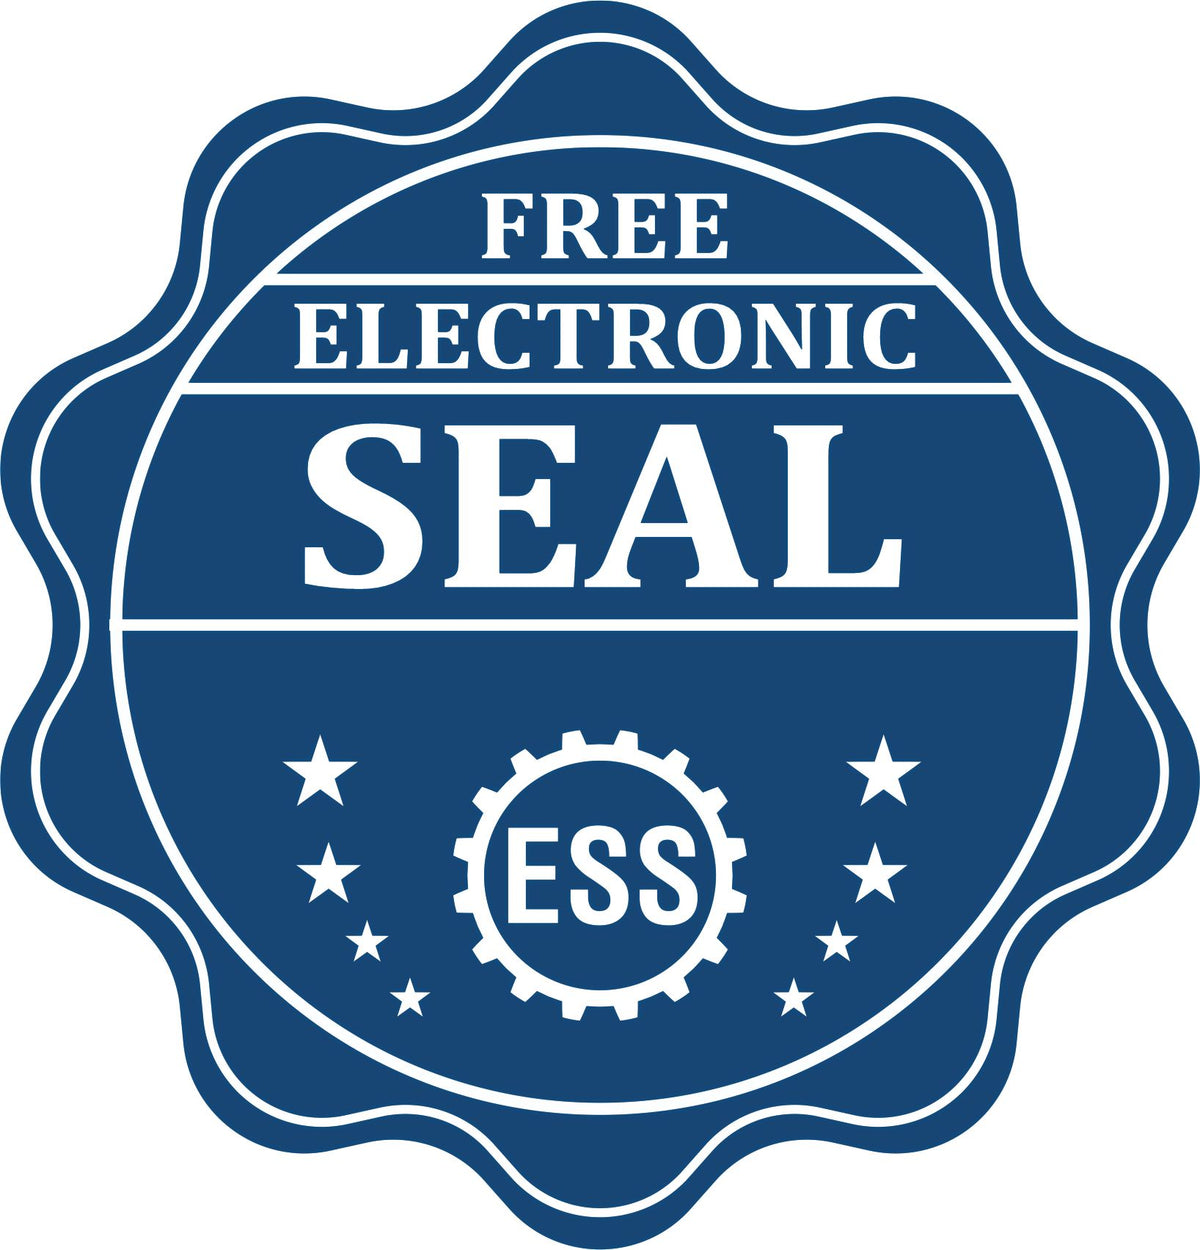 A badge showing a free electronic seal for the State of North Carolina Extended Long Reach Geologist Seal with stars and the ESS gear on the emblem.